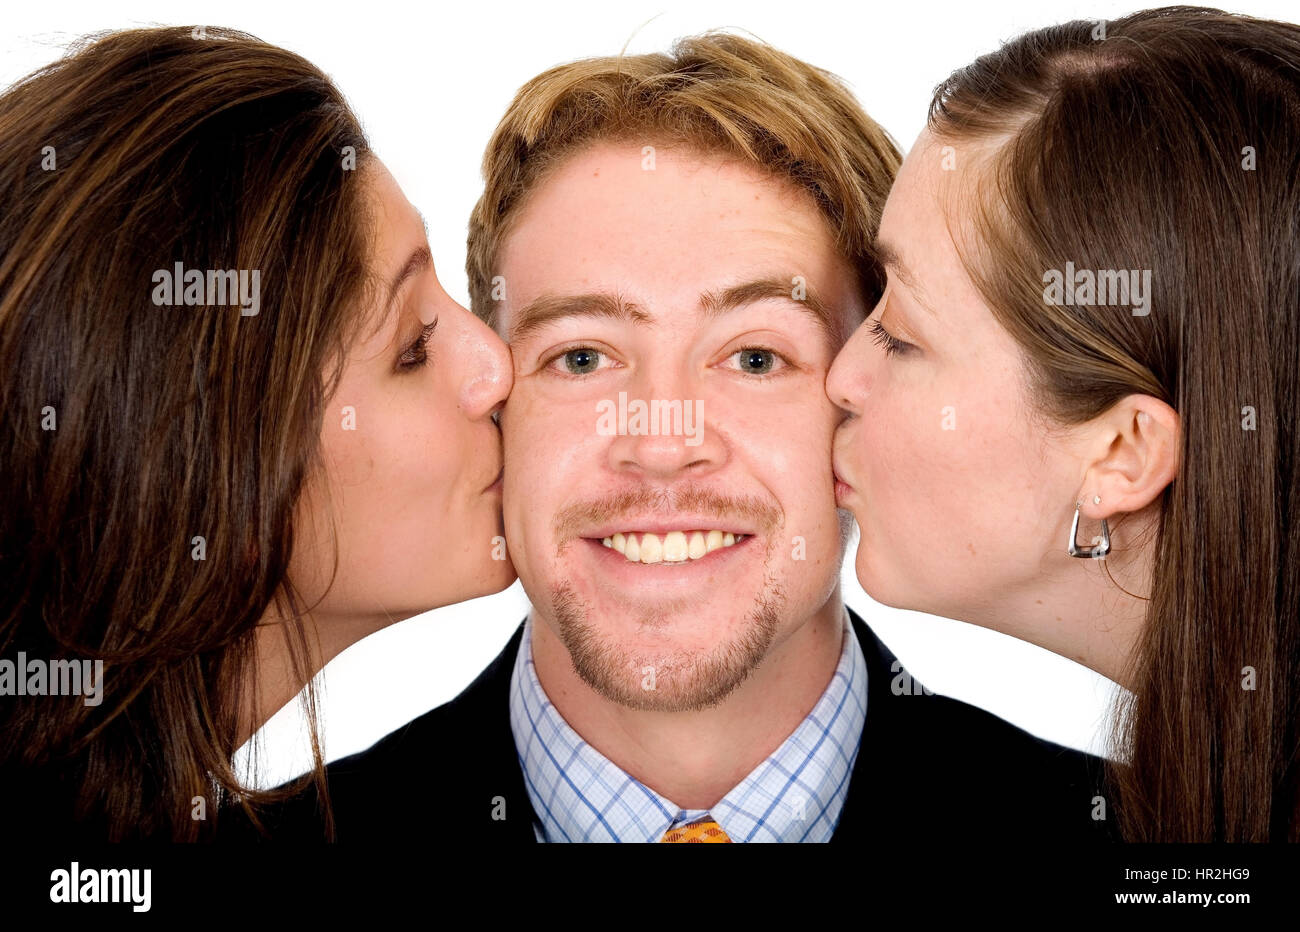 Business man with two girls kissing him at the same time isolated over a white background Stock Photo